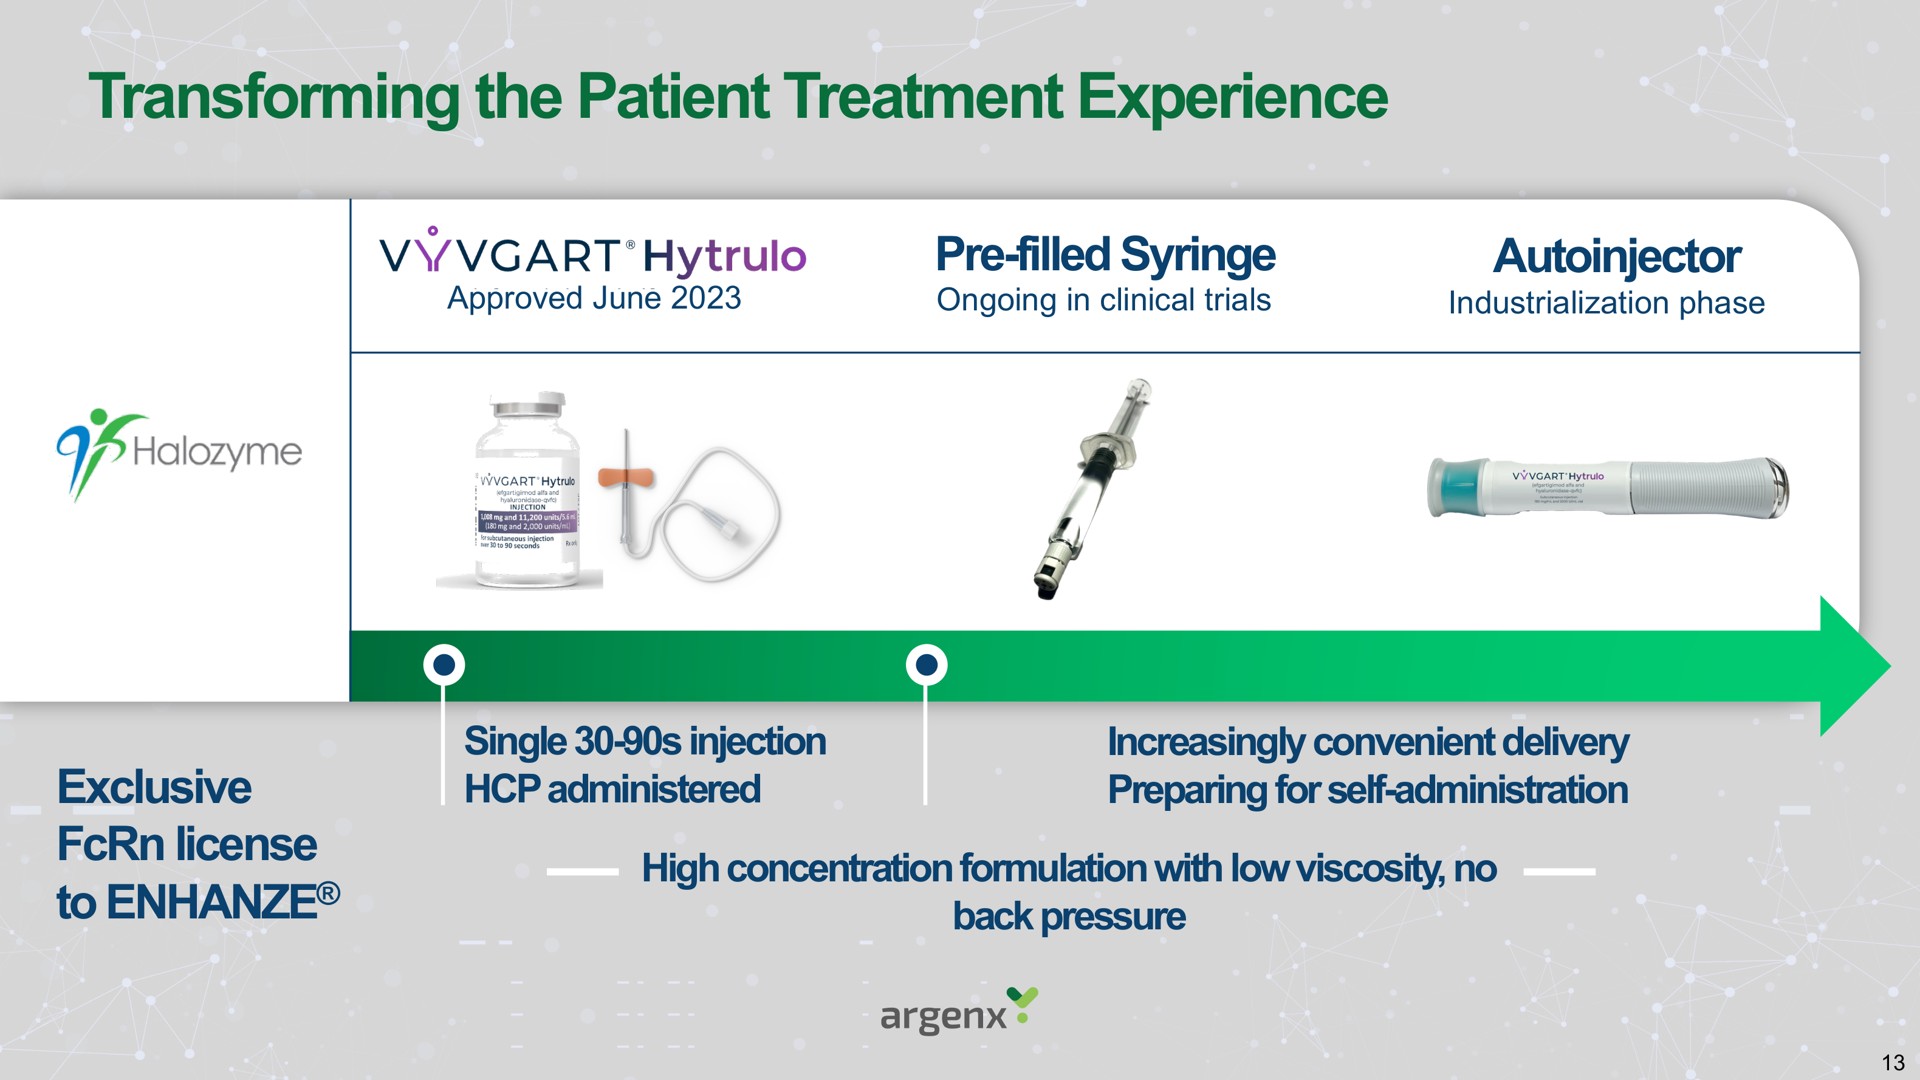 transforming the patient treatment experience filled syringe | argenx SE